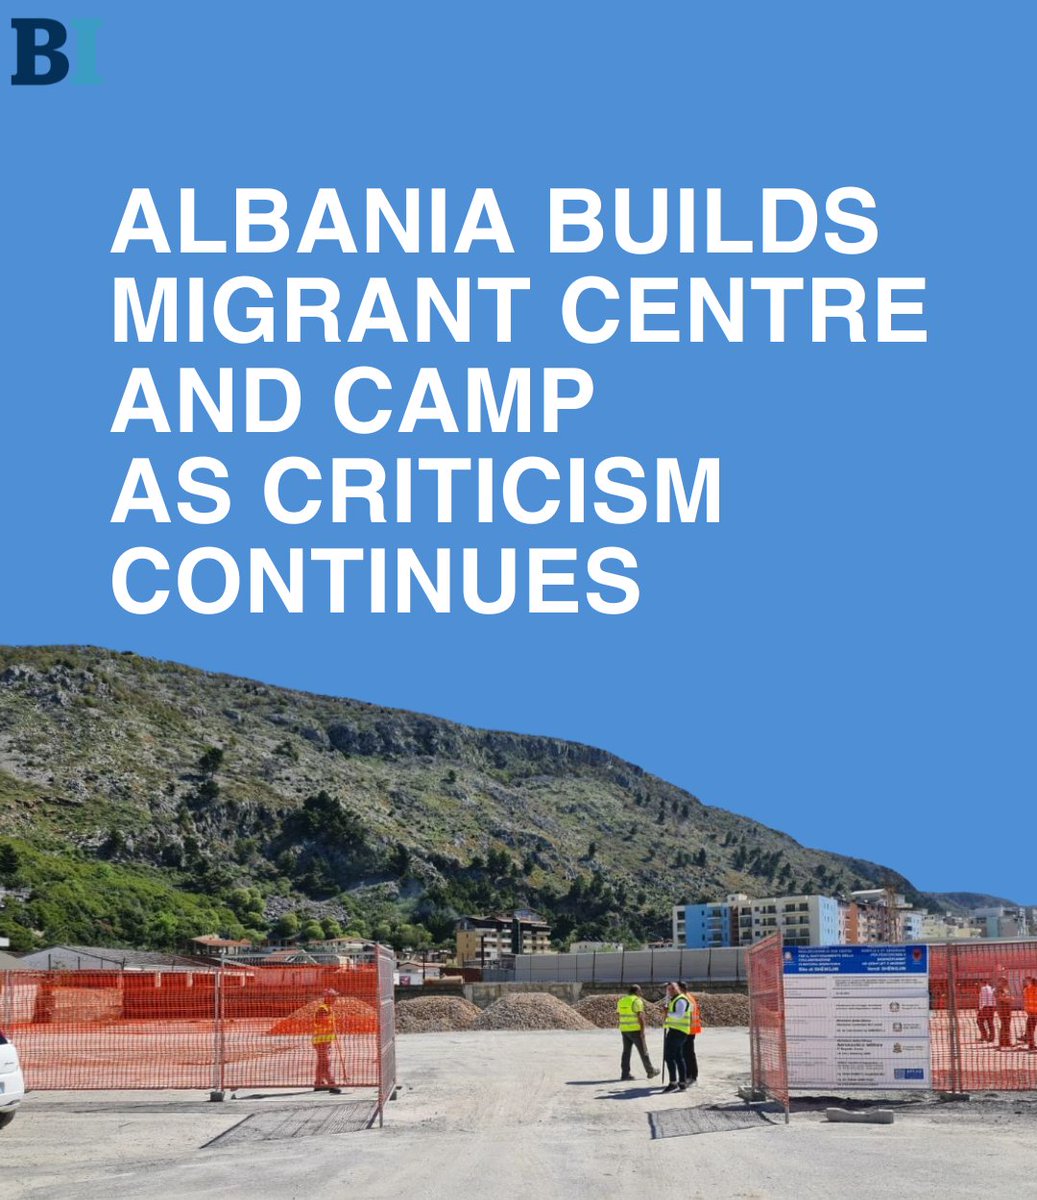 Building of the construction of a camp and receiving center for migrants from Italy began in Albania; nevertheless, locals and activists still view the idea with great disapproval. Subscribe to Balkan Insight Premium to read the full article. 👇 balkaninsight.com/2024/04/12/alb…